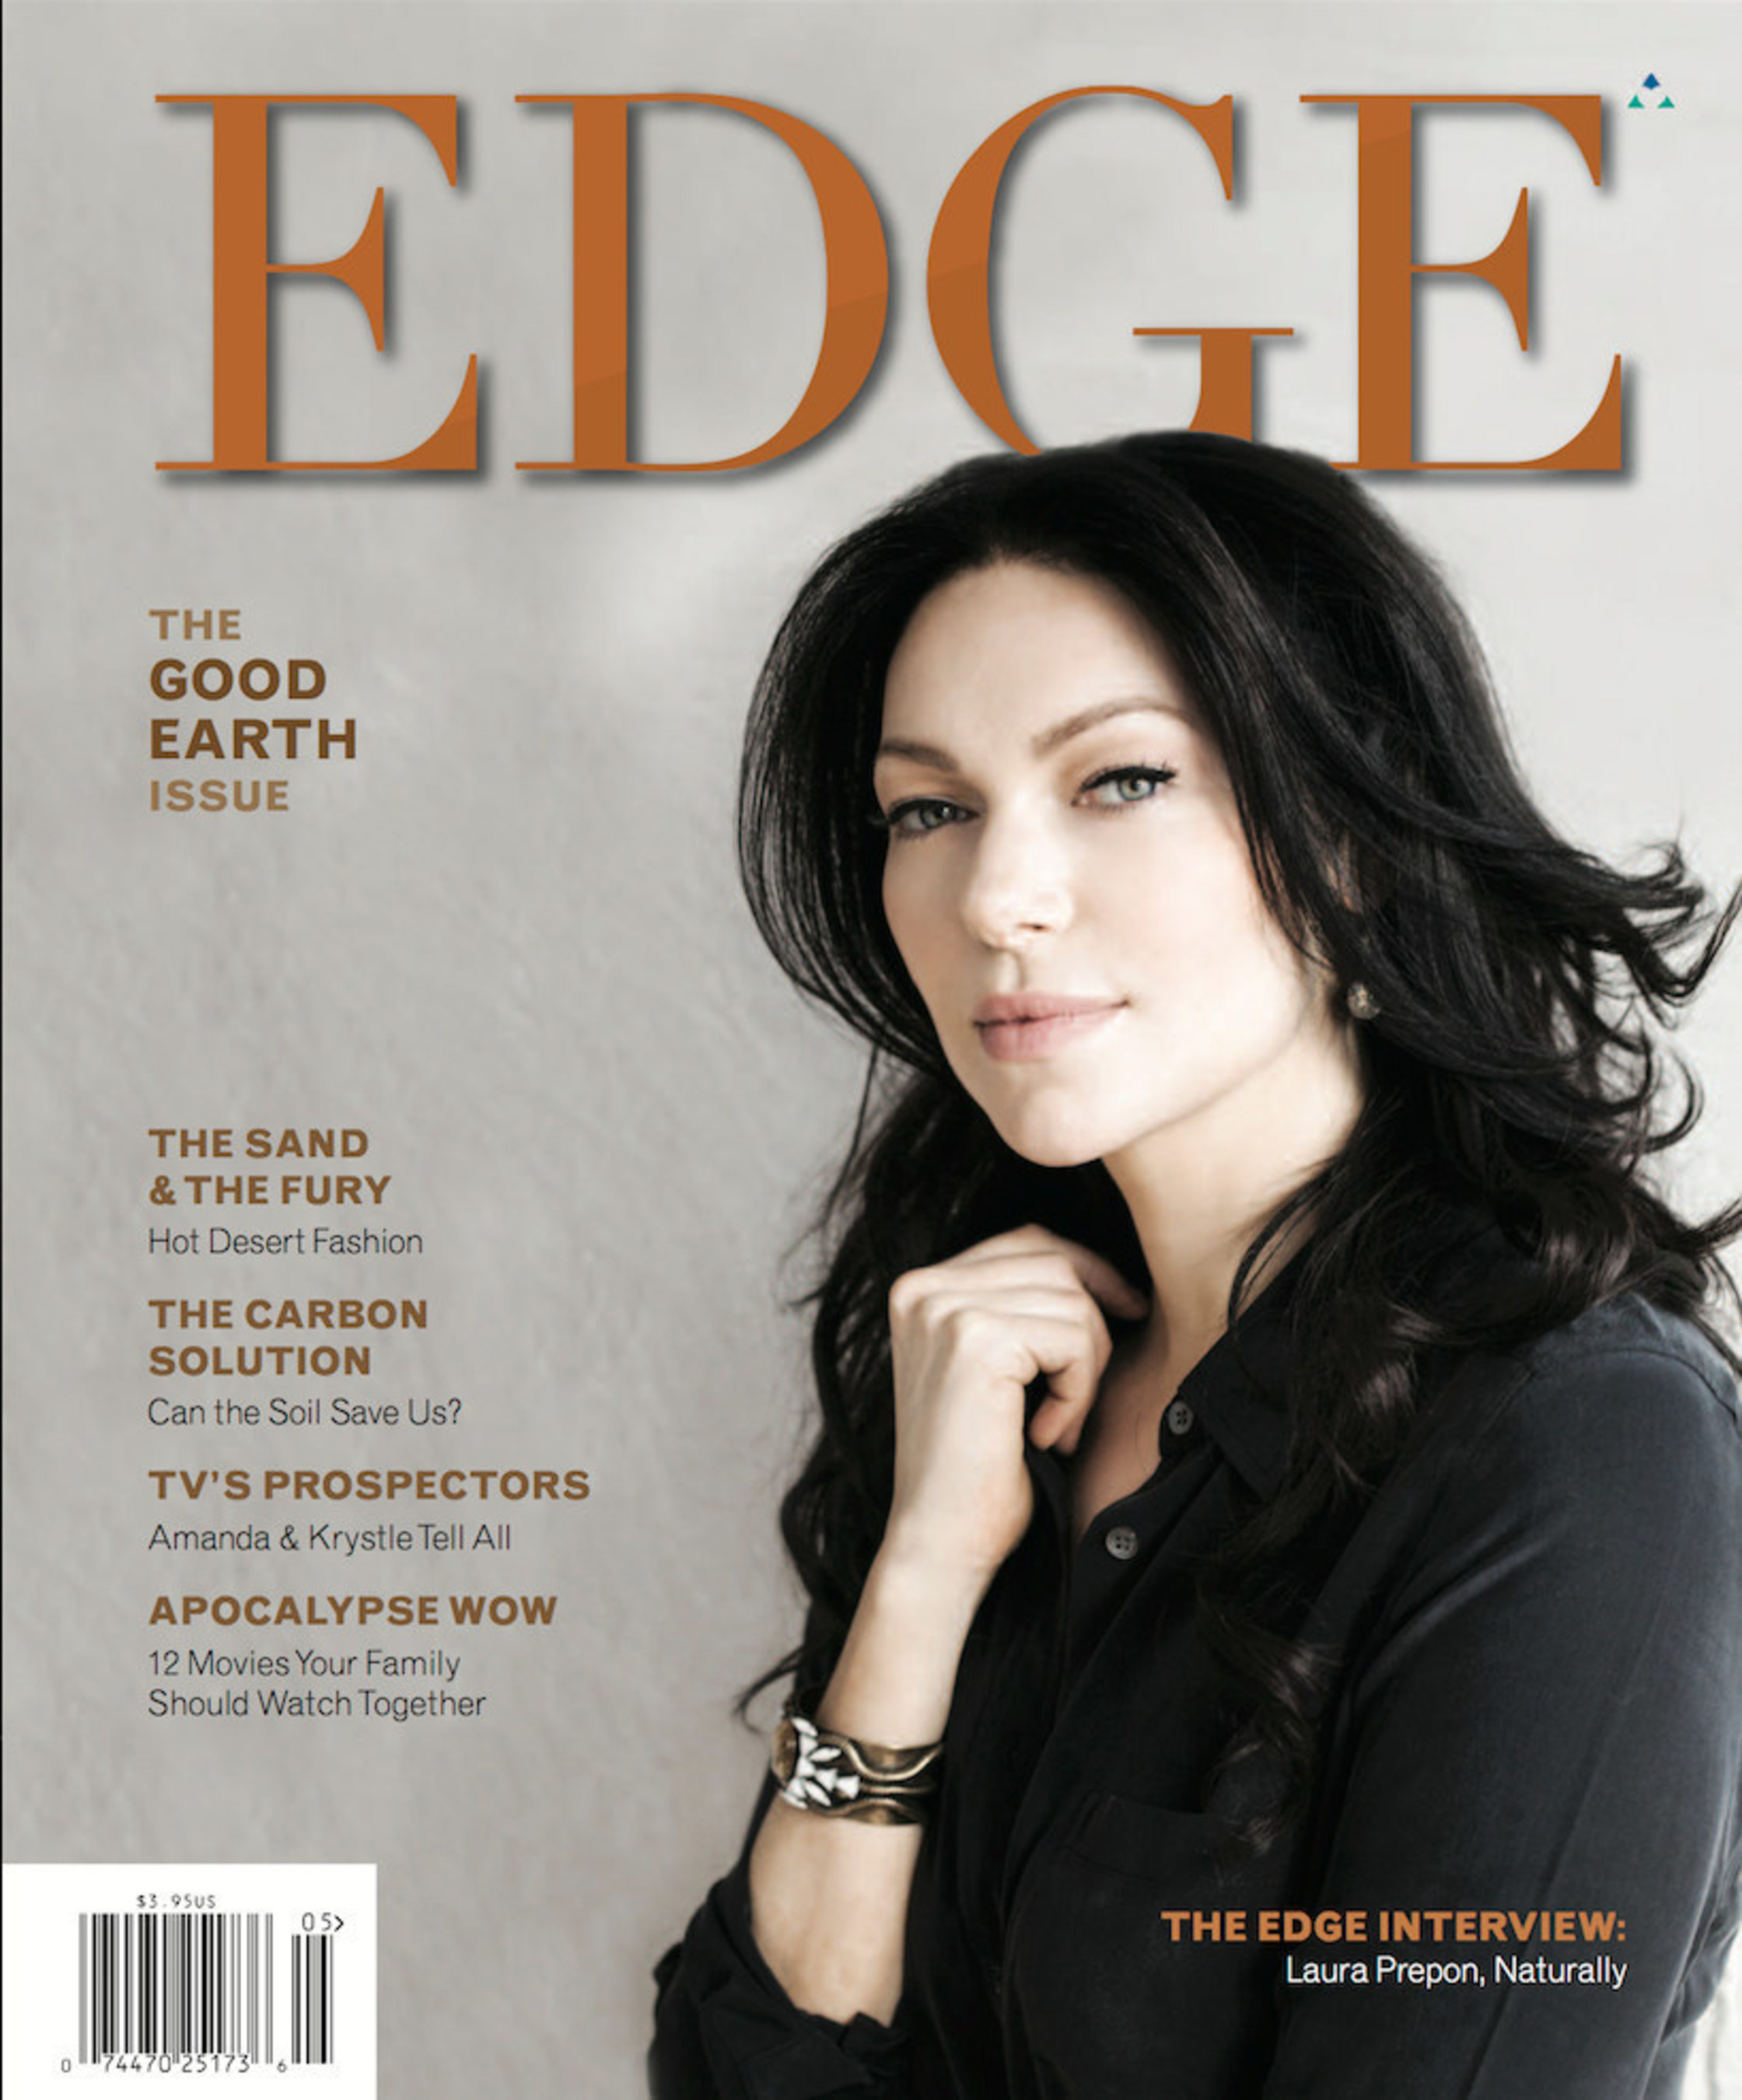 Laura Prepon Celebrates 'The Good Earth' with EDGE Magazine - Laura Prepon, star of the Netflix series Orange Is the New Black, has been eating organic since she was a child.  In her interview with Gerry Strauss, Prepon reveals that she is co-authoring a book on organic eating-and-living with health coach Elizabeth Troy. EDGE is a lifestyle magazine published by Trinitas Regional Medical Center, in Elizabeth, New Jersey. For more on Trinitas, www.TrinitasRMC.org or call (908) 994-5138. For more on EDGE Magazine: www.EdgeMagOnline.com - Twitter @EDGEMagNJ - Facebook EDGE Magazine (NJ) For Advertising  call 908-247-1277